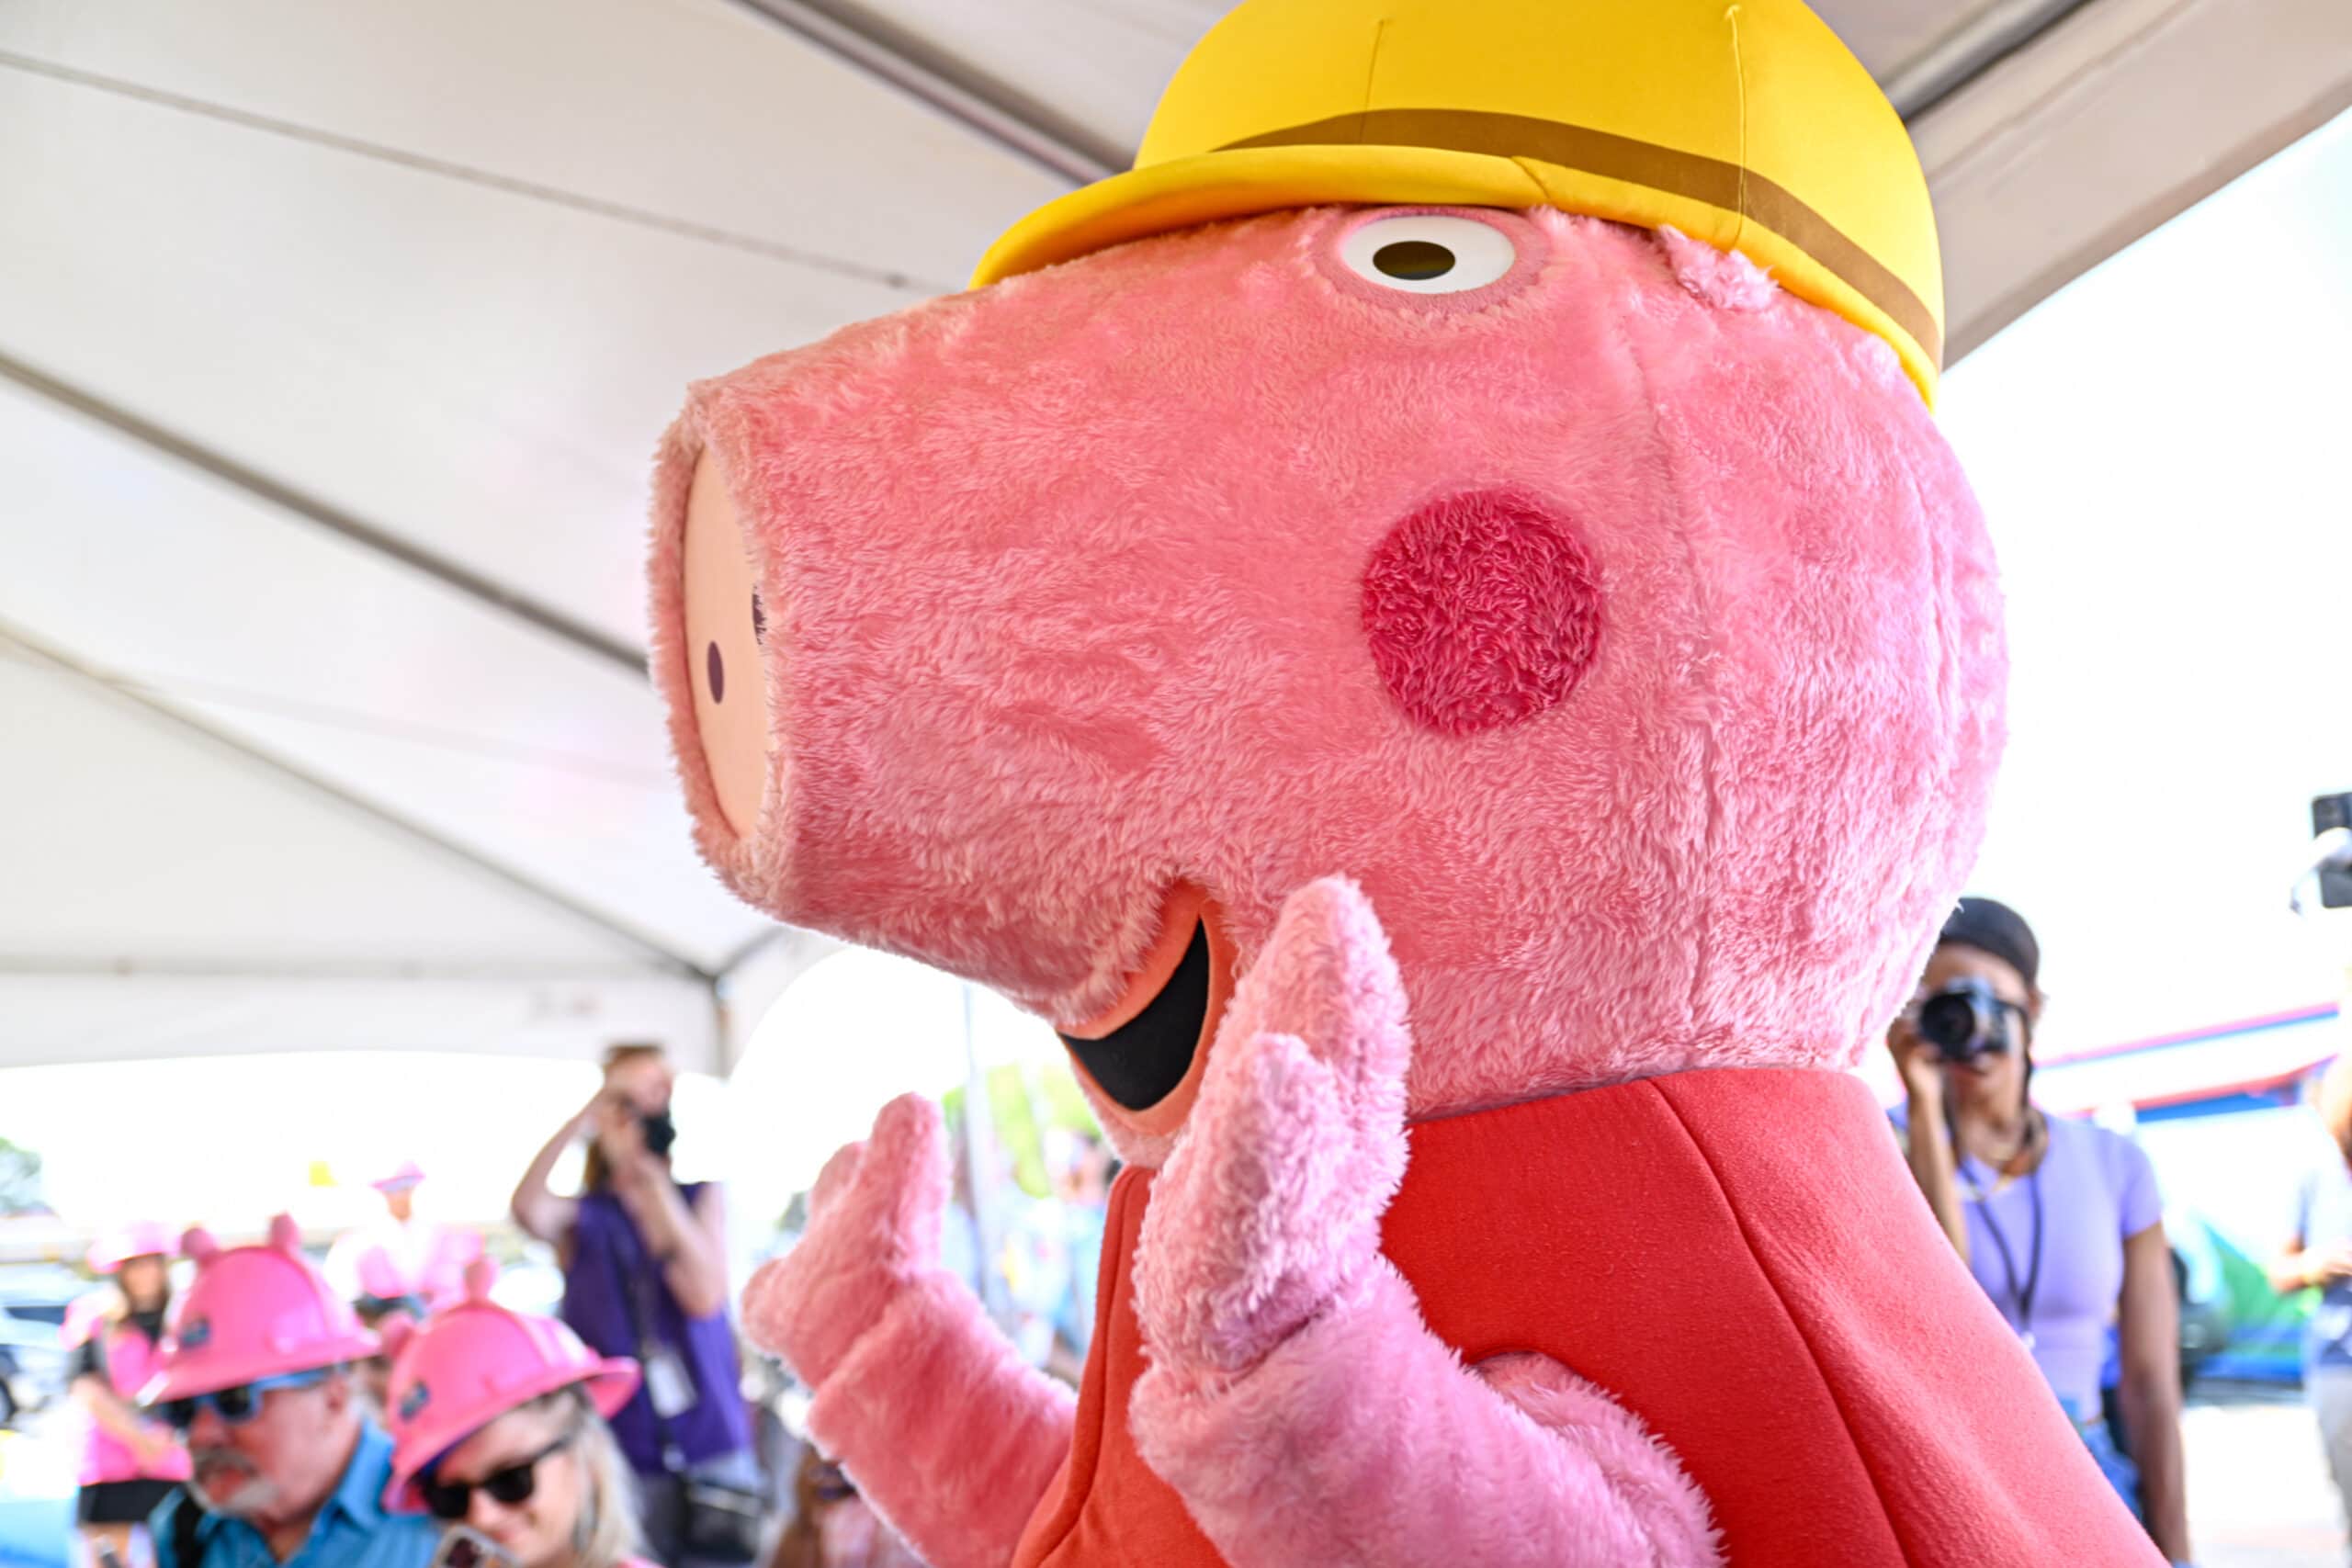 Peppa Pig Dallas-Fort Worth theme park has opened plans to open in 2024